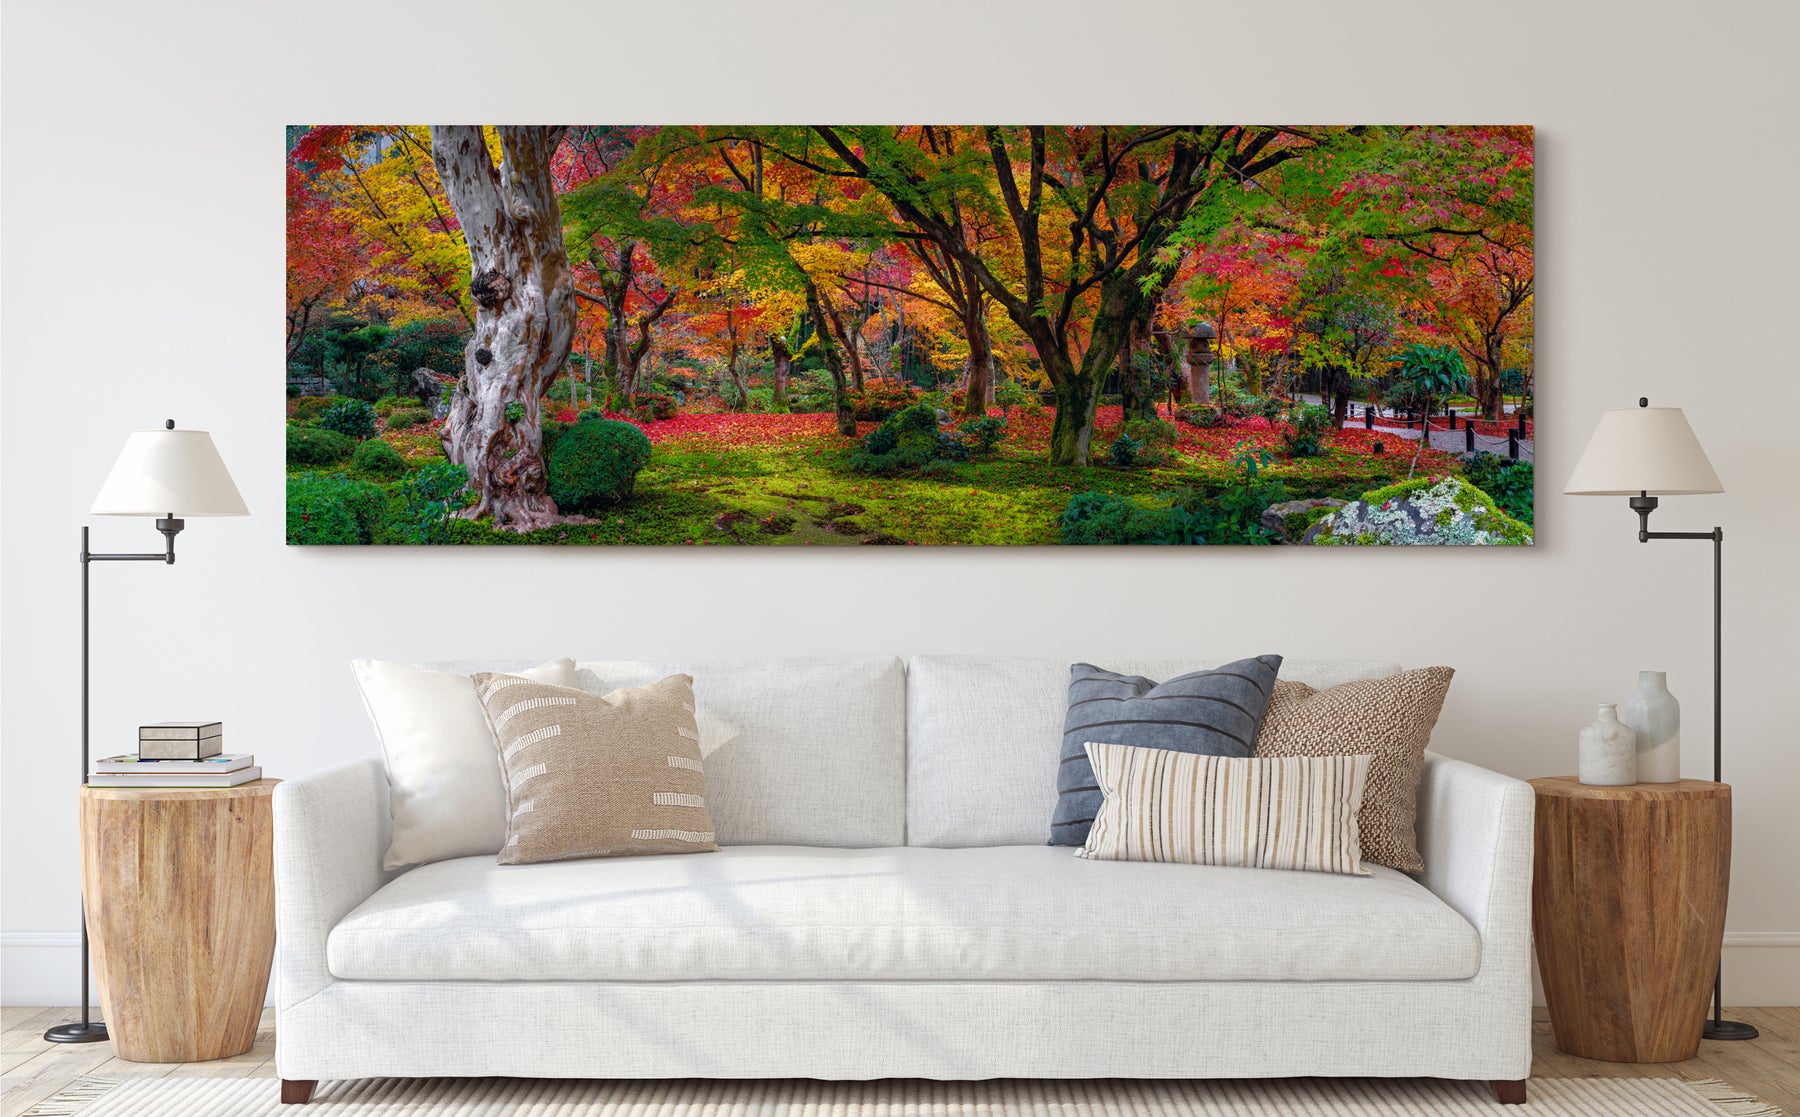 Large photograph of trees with green, yellow, and red leaves photographed by Peter Lik handing on the wall of a living room 